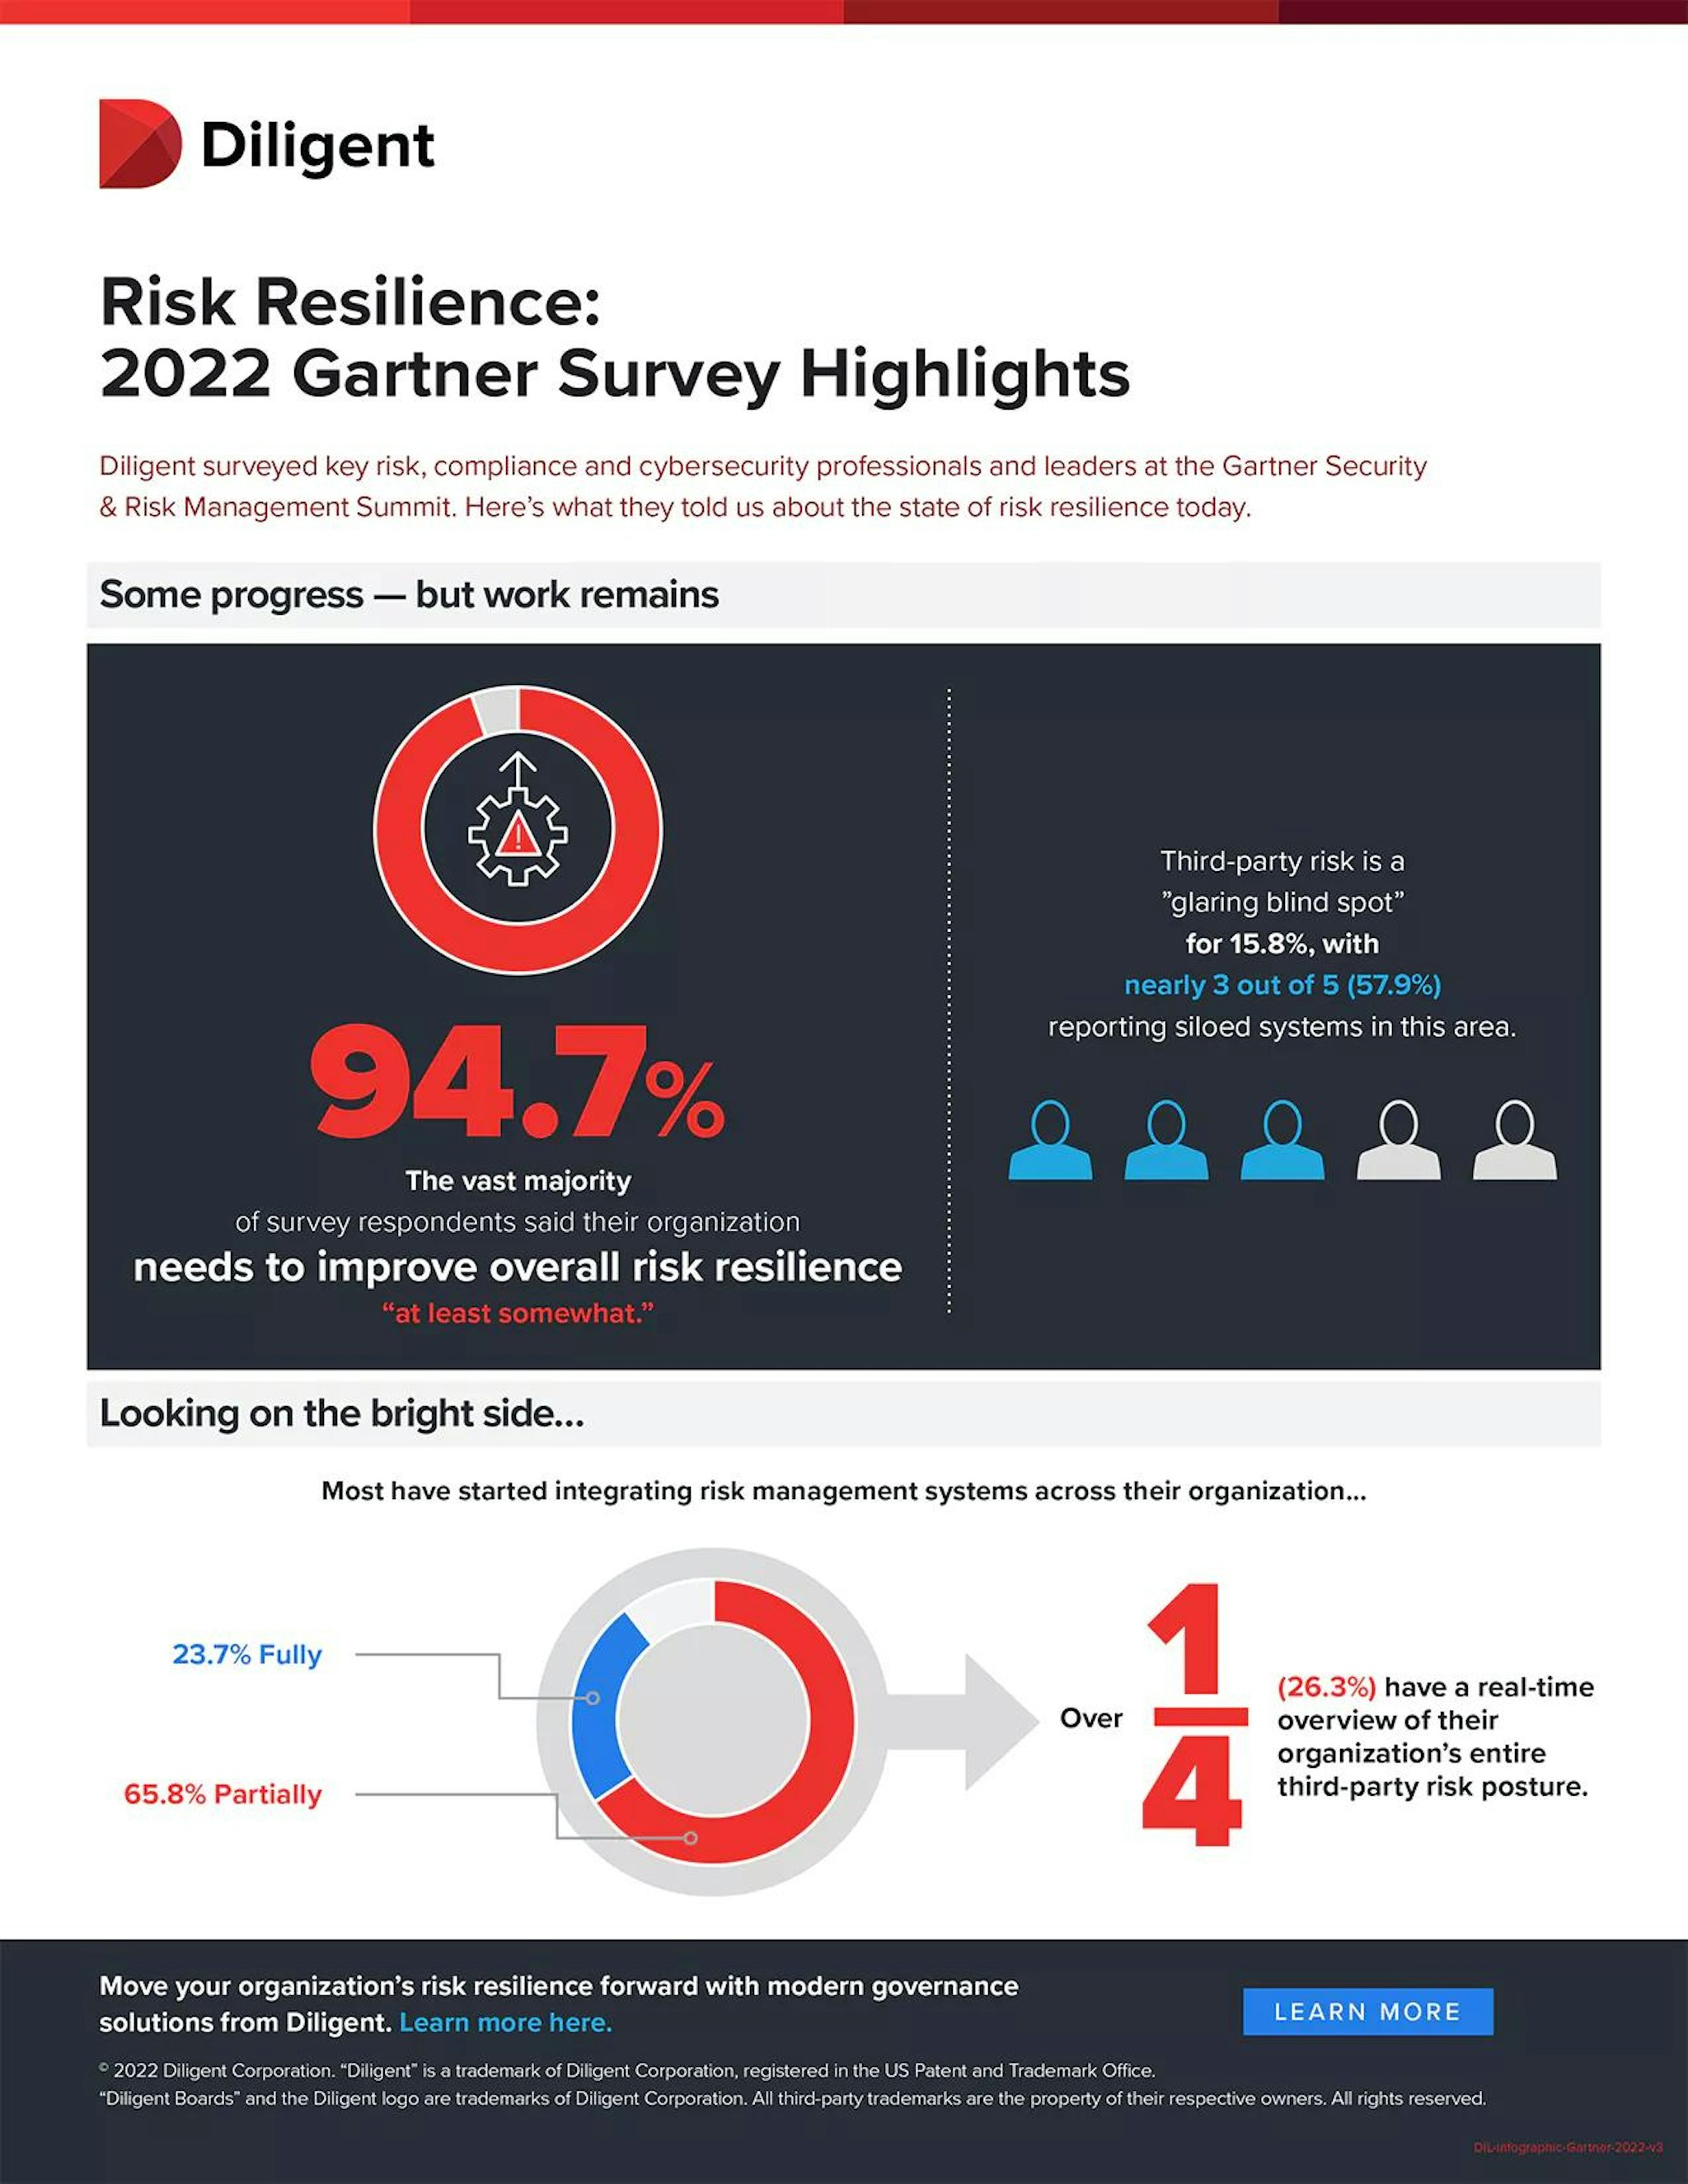 Infographic showcasing risk resilience survey results